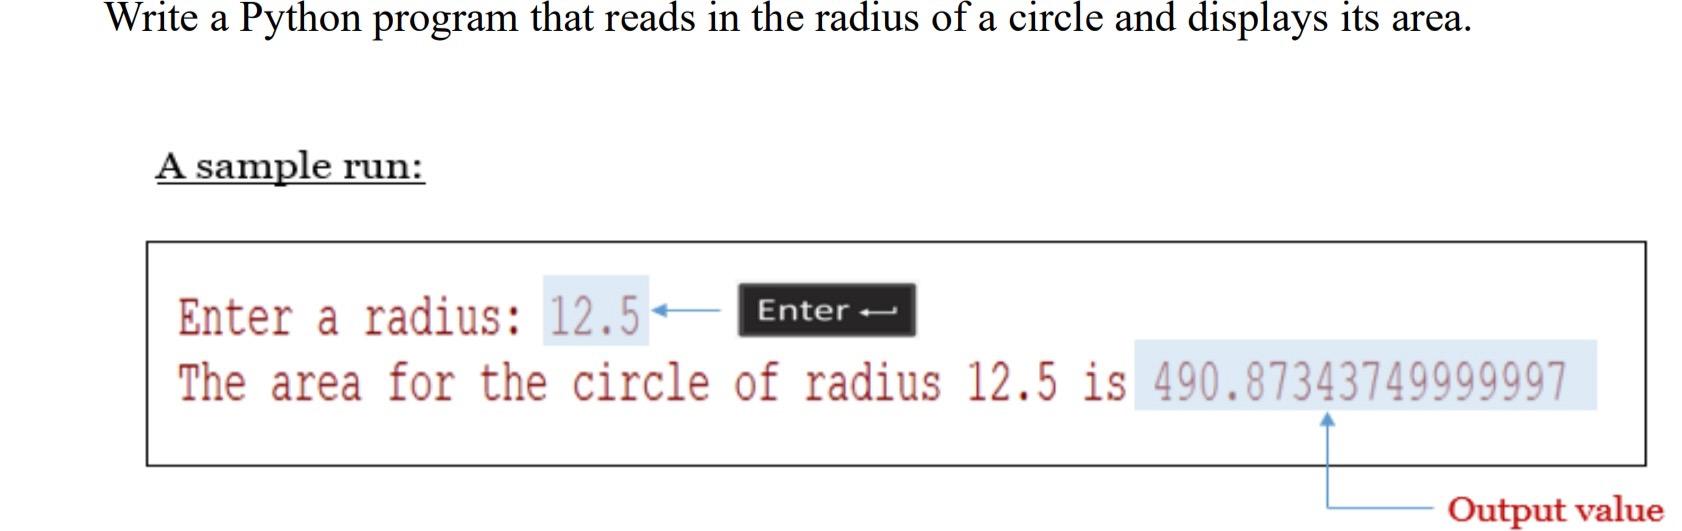 Write a Python program that reads in the radius of a circle and displays its area. A sample run: Enter a